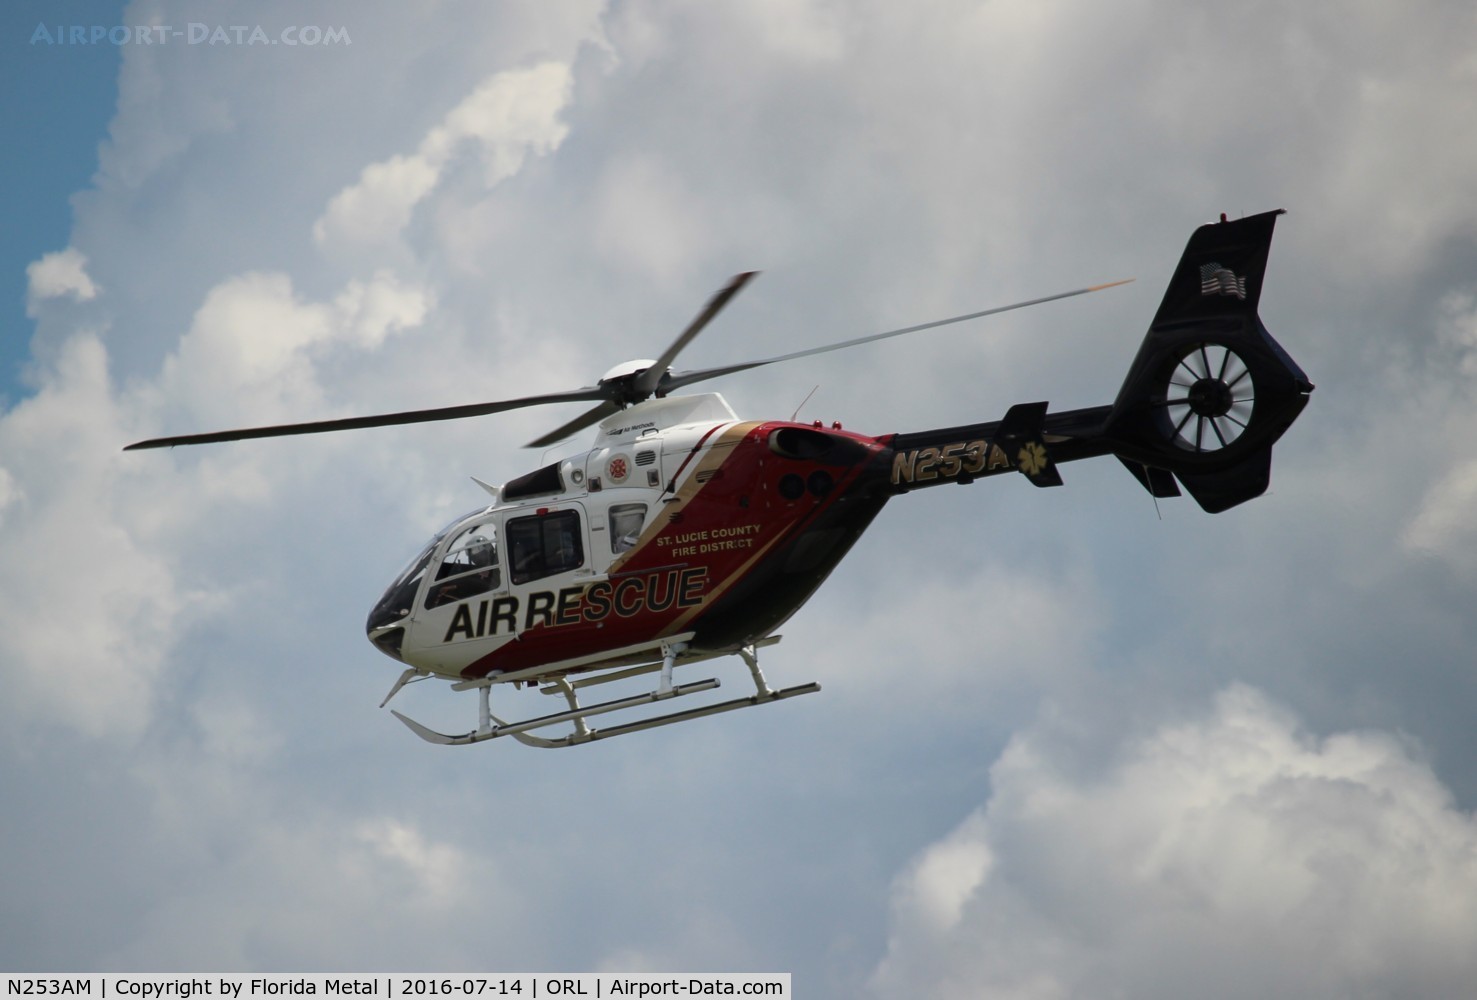 N253AM, 2008 Eurocopter EC-135P-2+ C/N 0663, St. Lucie County Fire Rescue